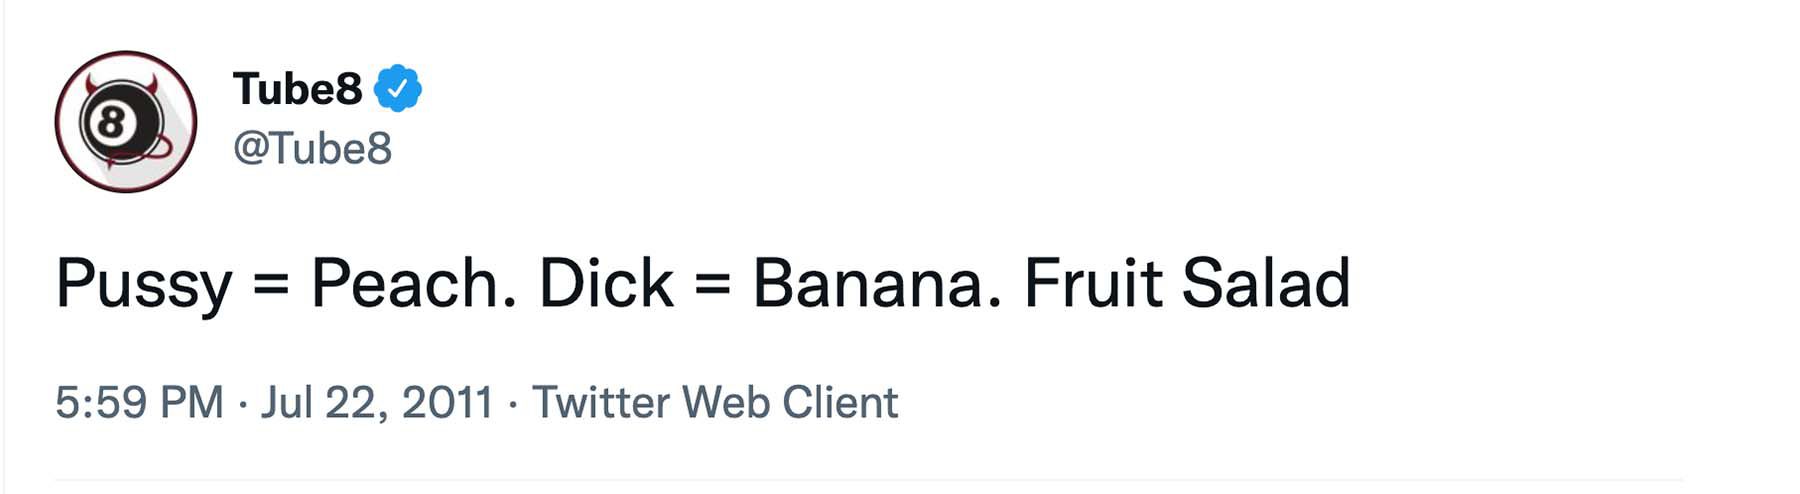 A tweet from Tube8 on July 22, 2011 that reads, “Pussy = Peach. Dick = Banana. Fruit Salad”